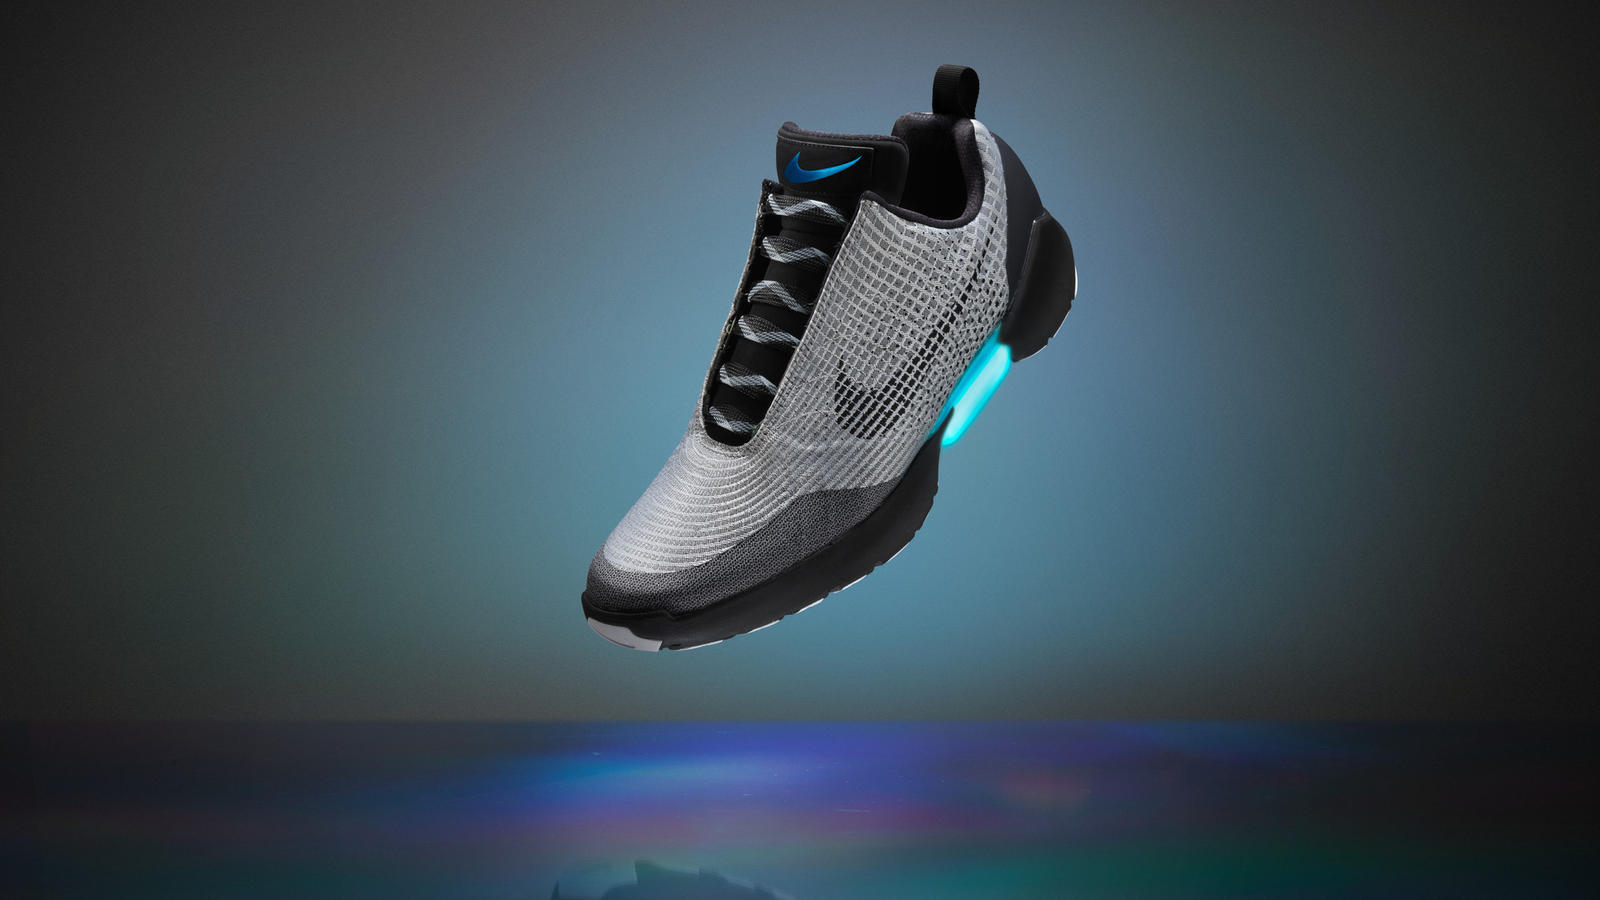 nike delivers dreams with air soles and self-lacing sneakers